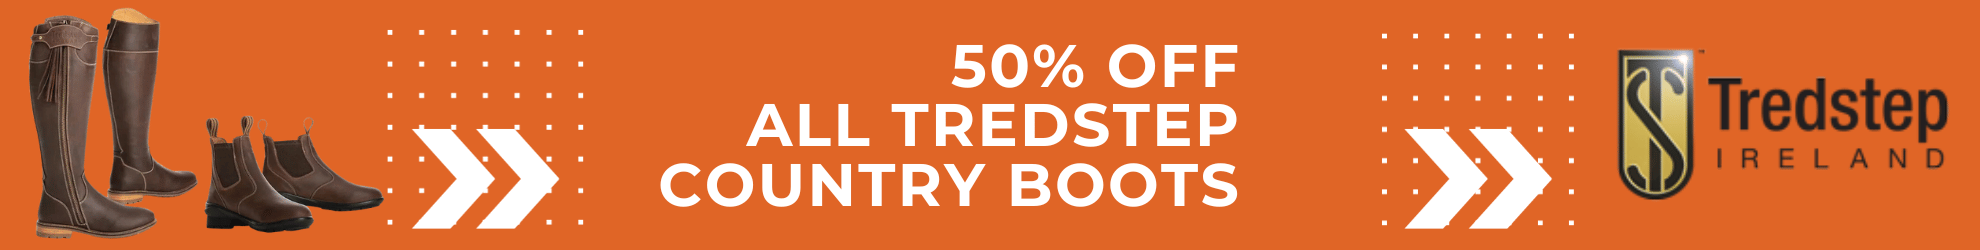 Tredstep Country Boots - 50% Off